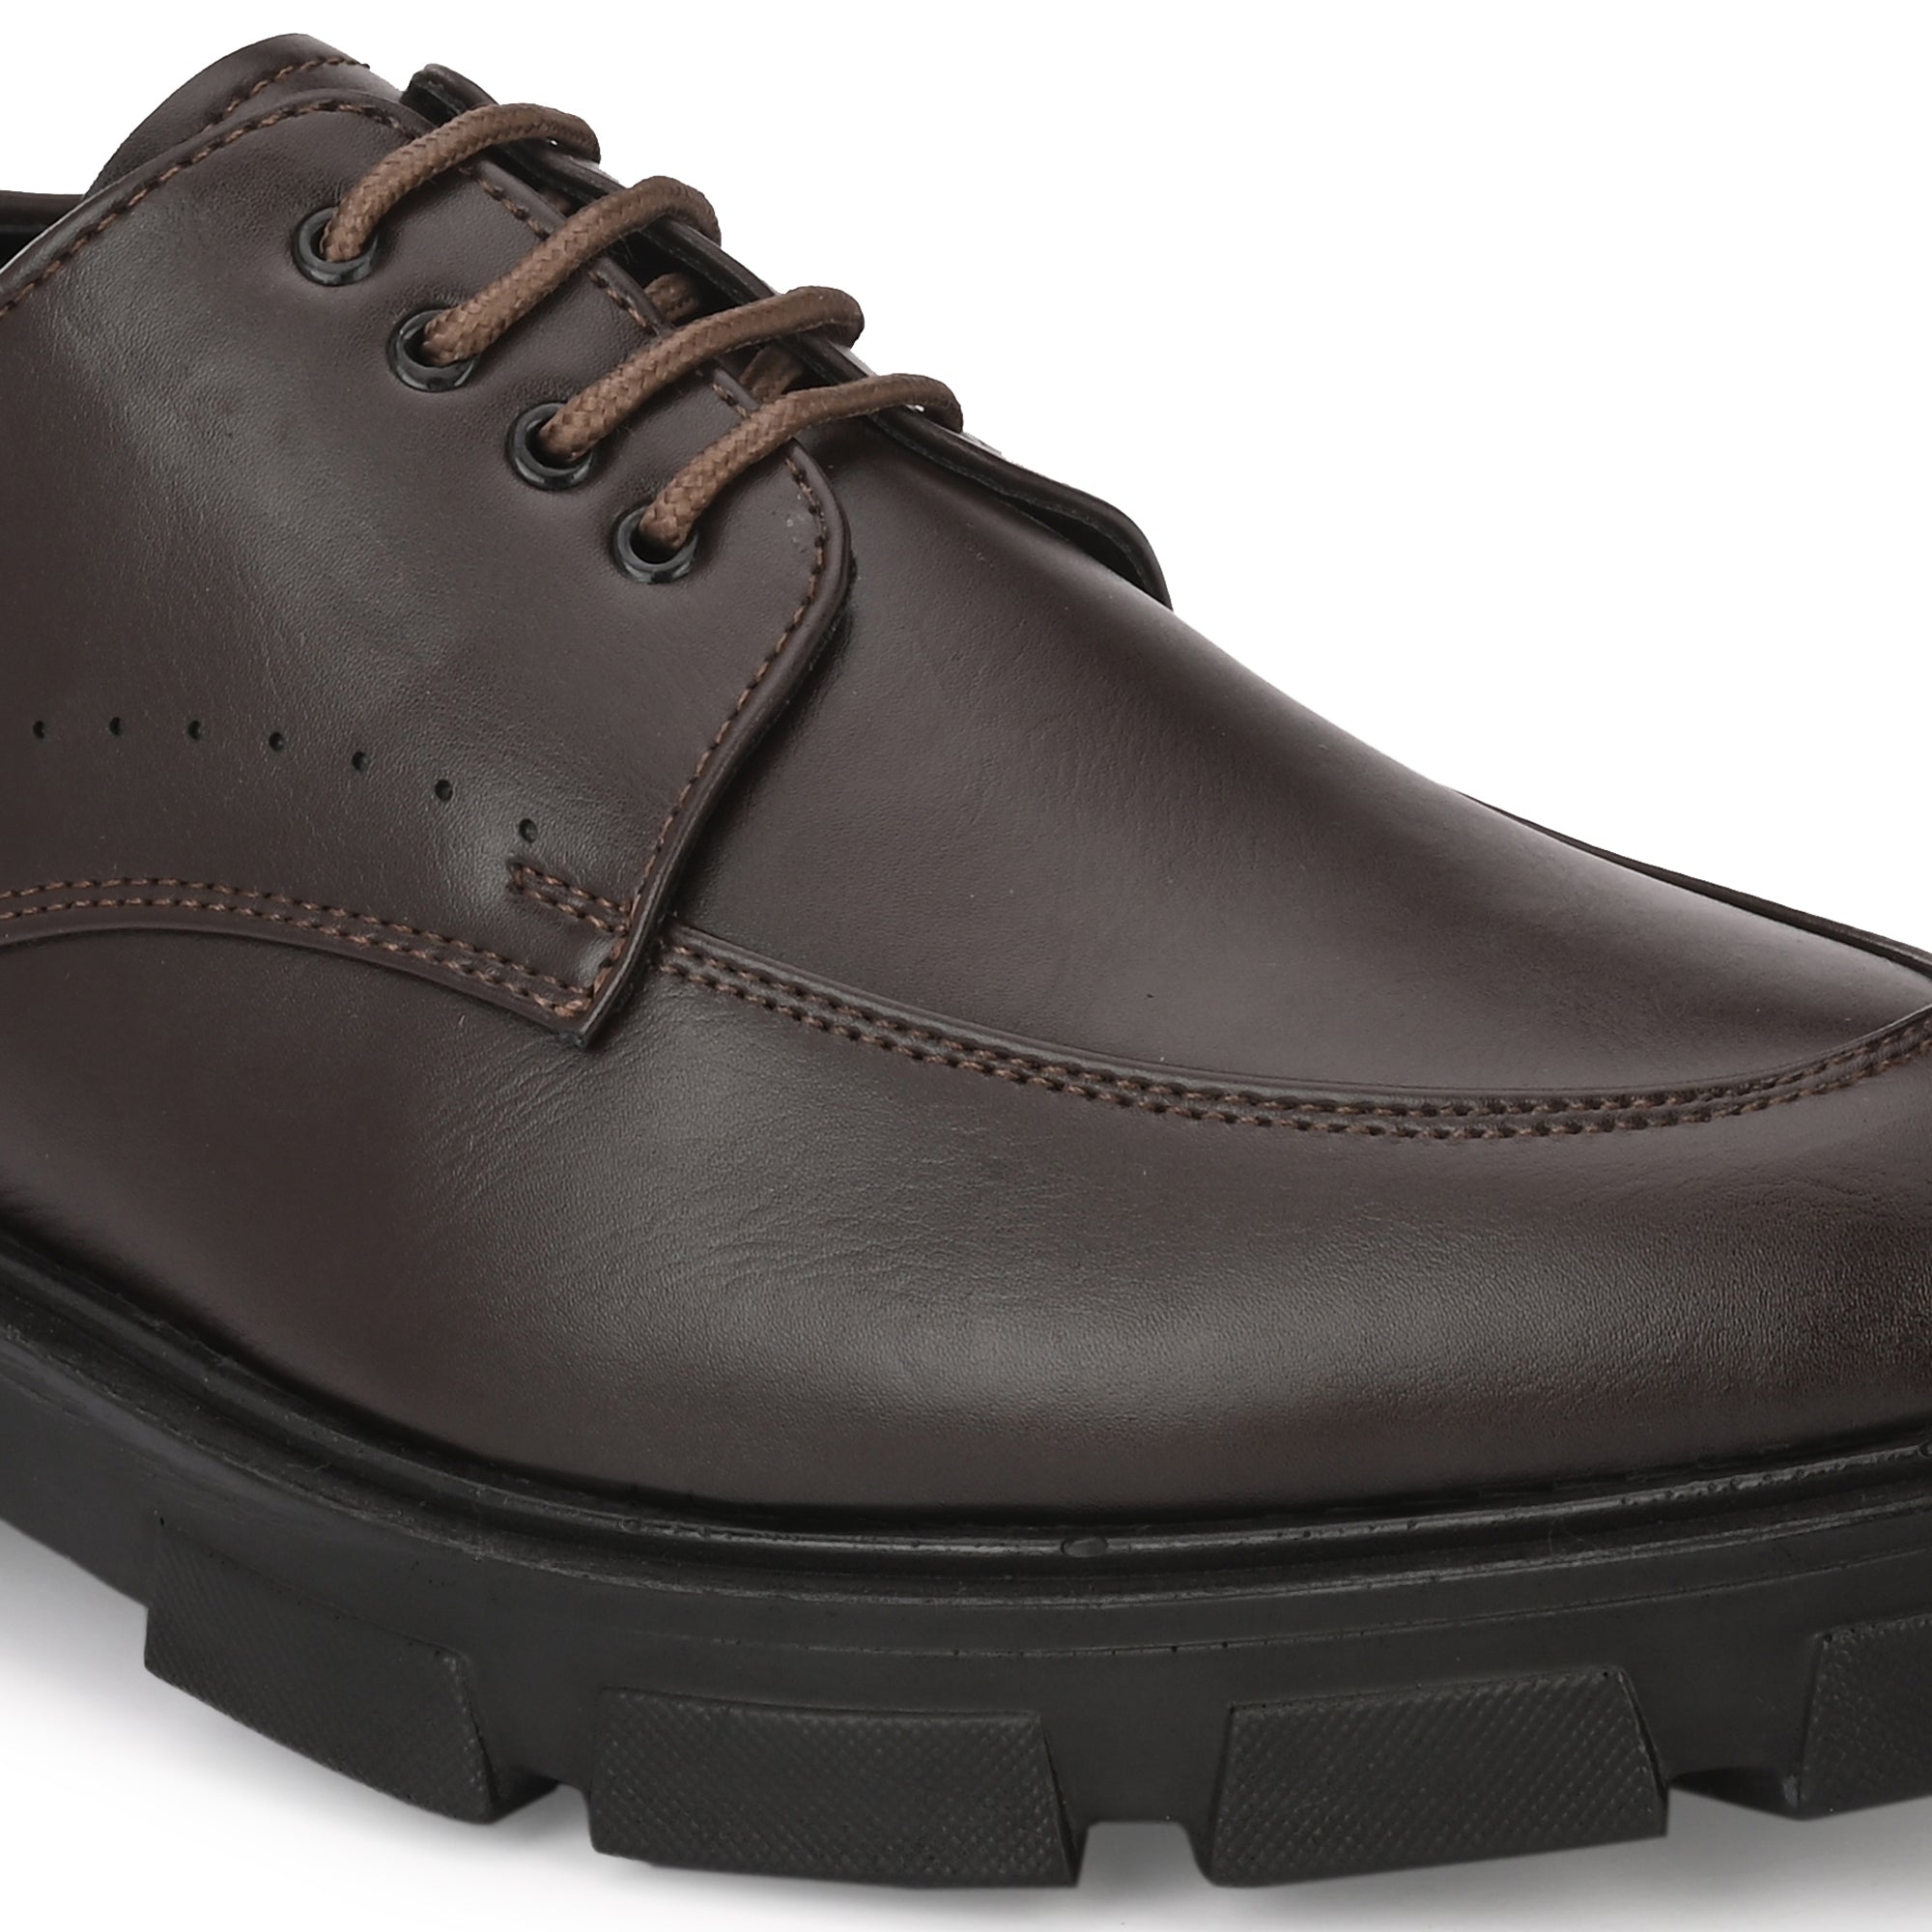 attitudist-brown-double-stitched-wing-tip-lace-up-derby-shoes-for-men